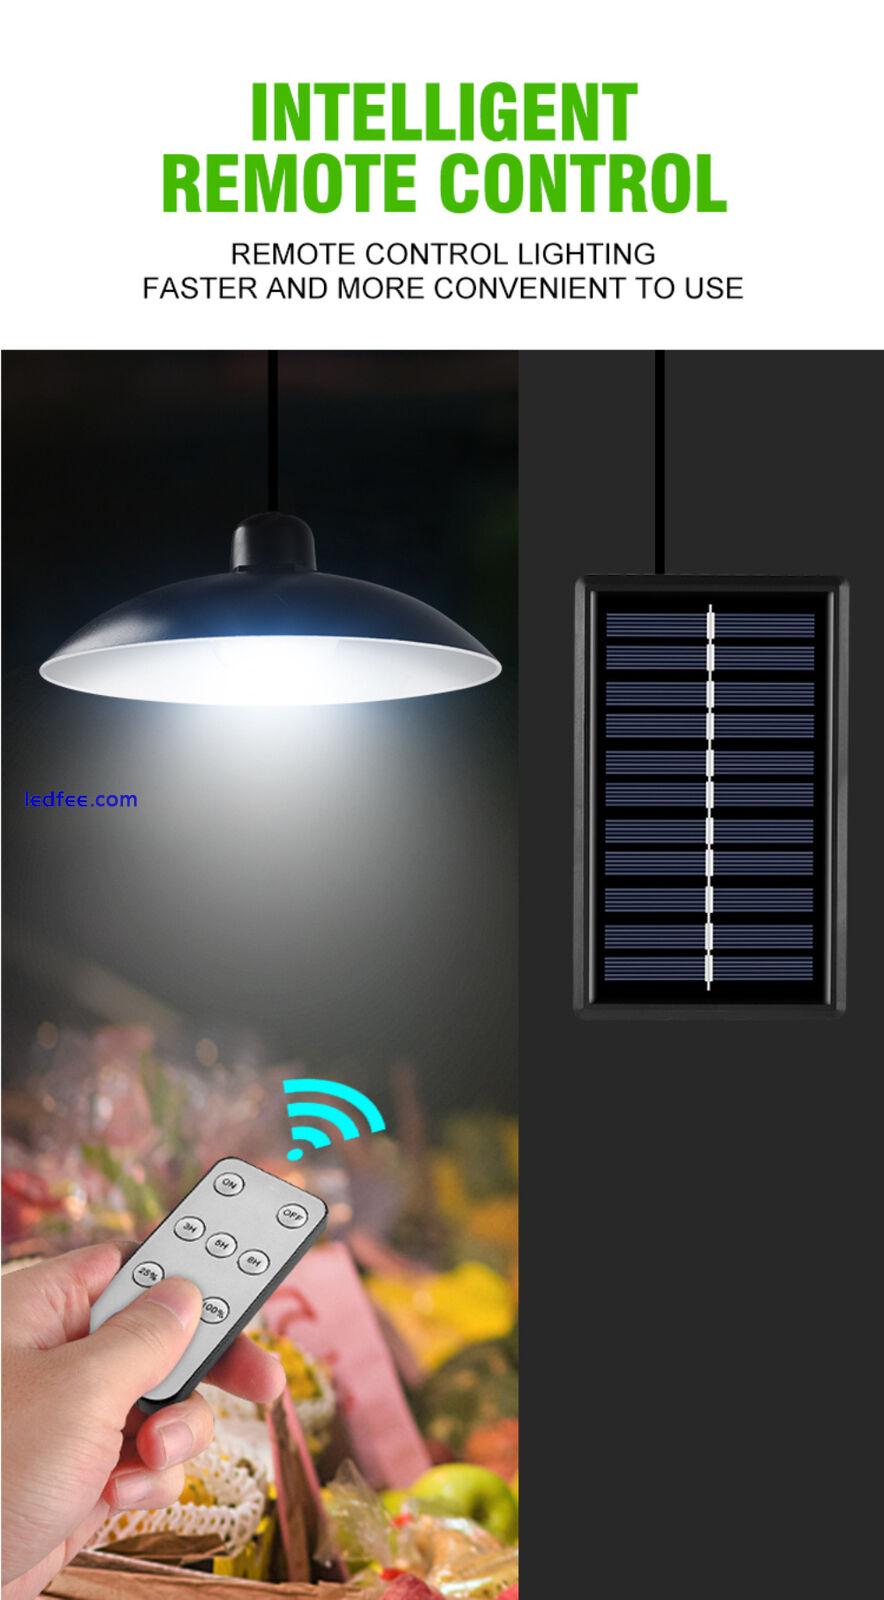 LED Outdoor Solar Street Wall Light PIR Motion Detection Sensor Lamp with Remote 1 